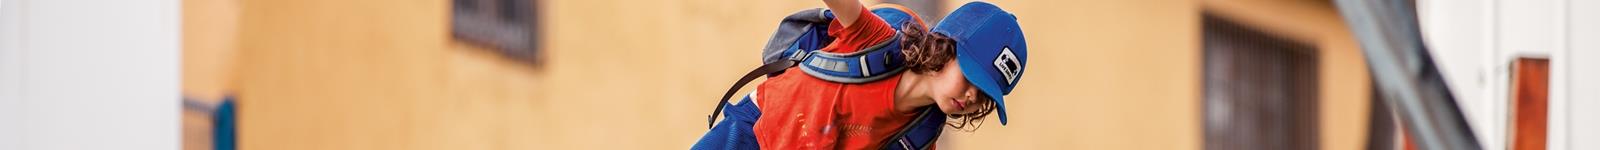 Neve Designs Kids Backpacks, Bags, and Totes 